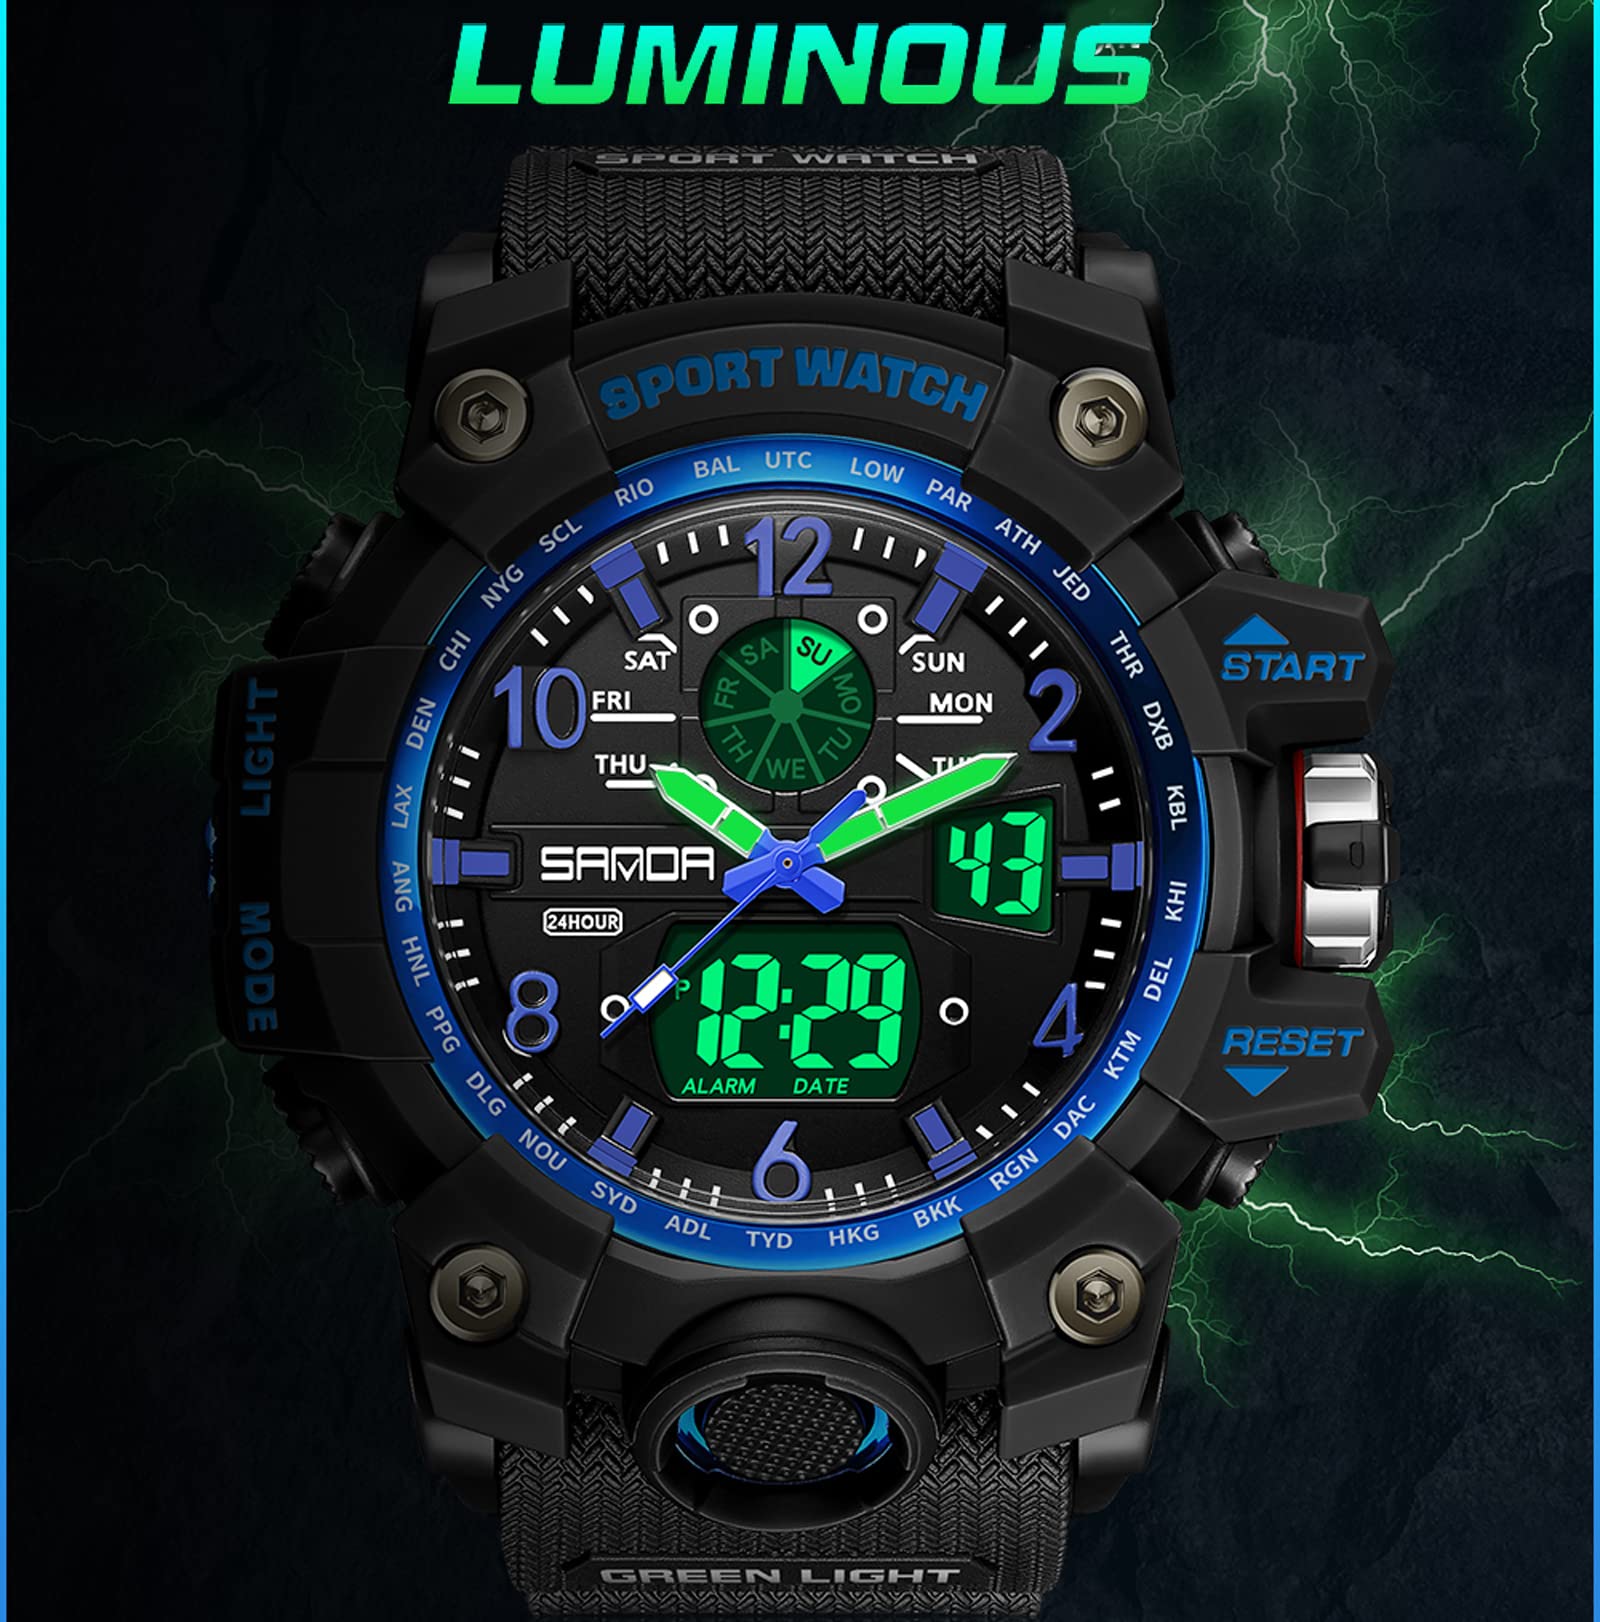 findtime Mens Military Watch Digital Analogue Watches Waterproof Sport Tactical Outdoor Wristwatch Big Face Alarm Stopwatch LED Wrist Watch for Men